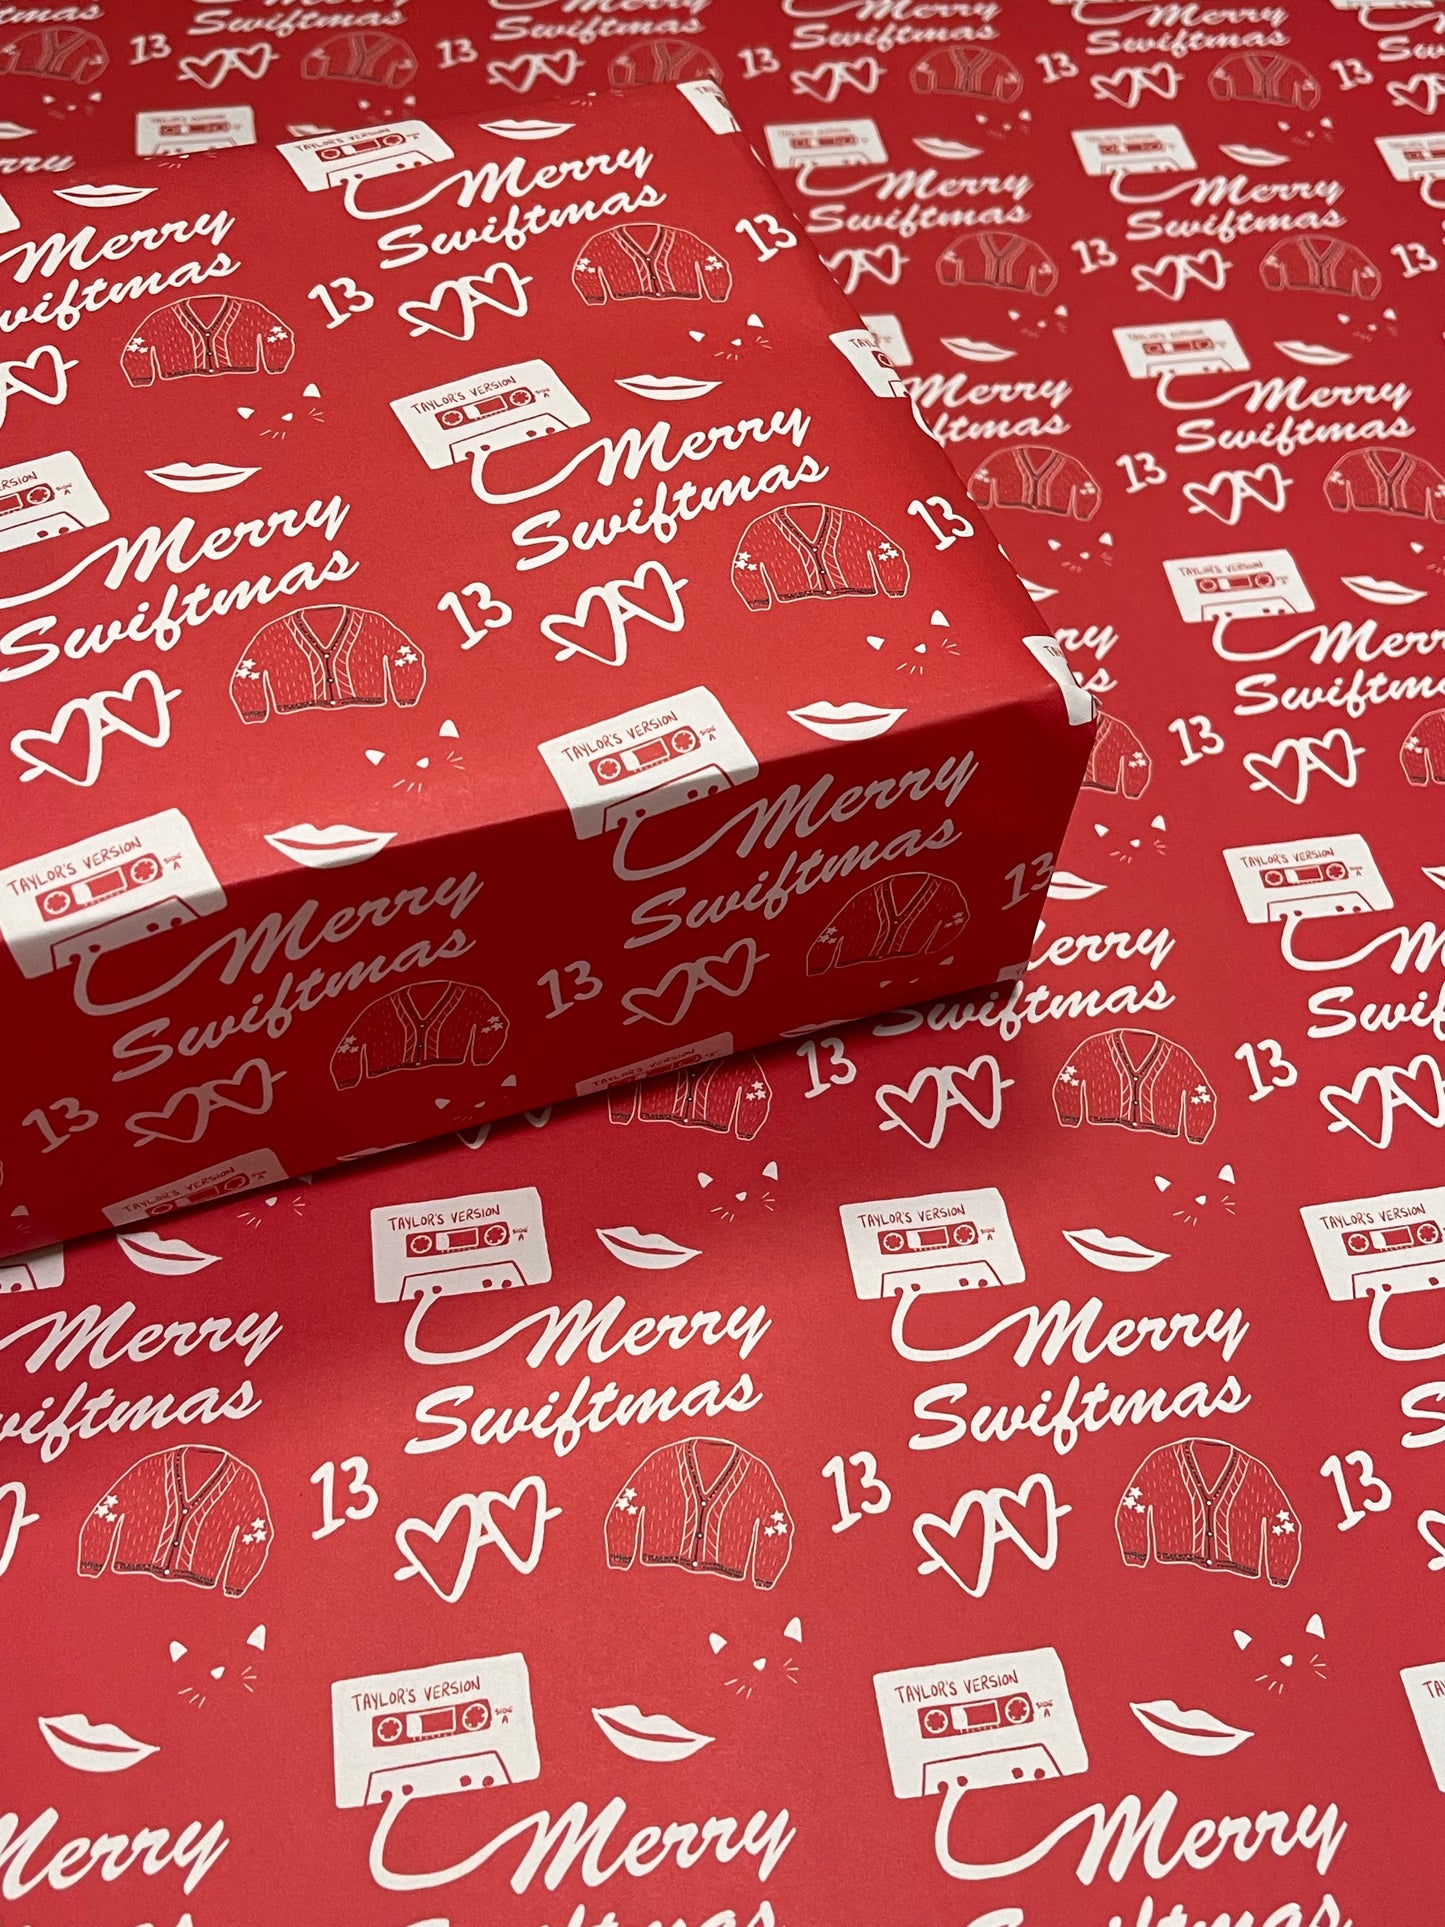 Merry Swiftmas Wrapping Paper Sheets (4 pieces)